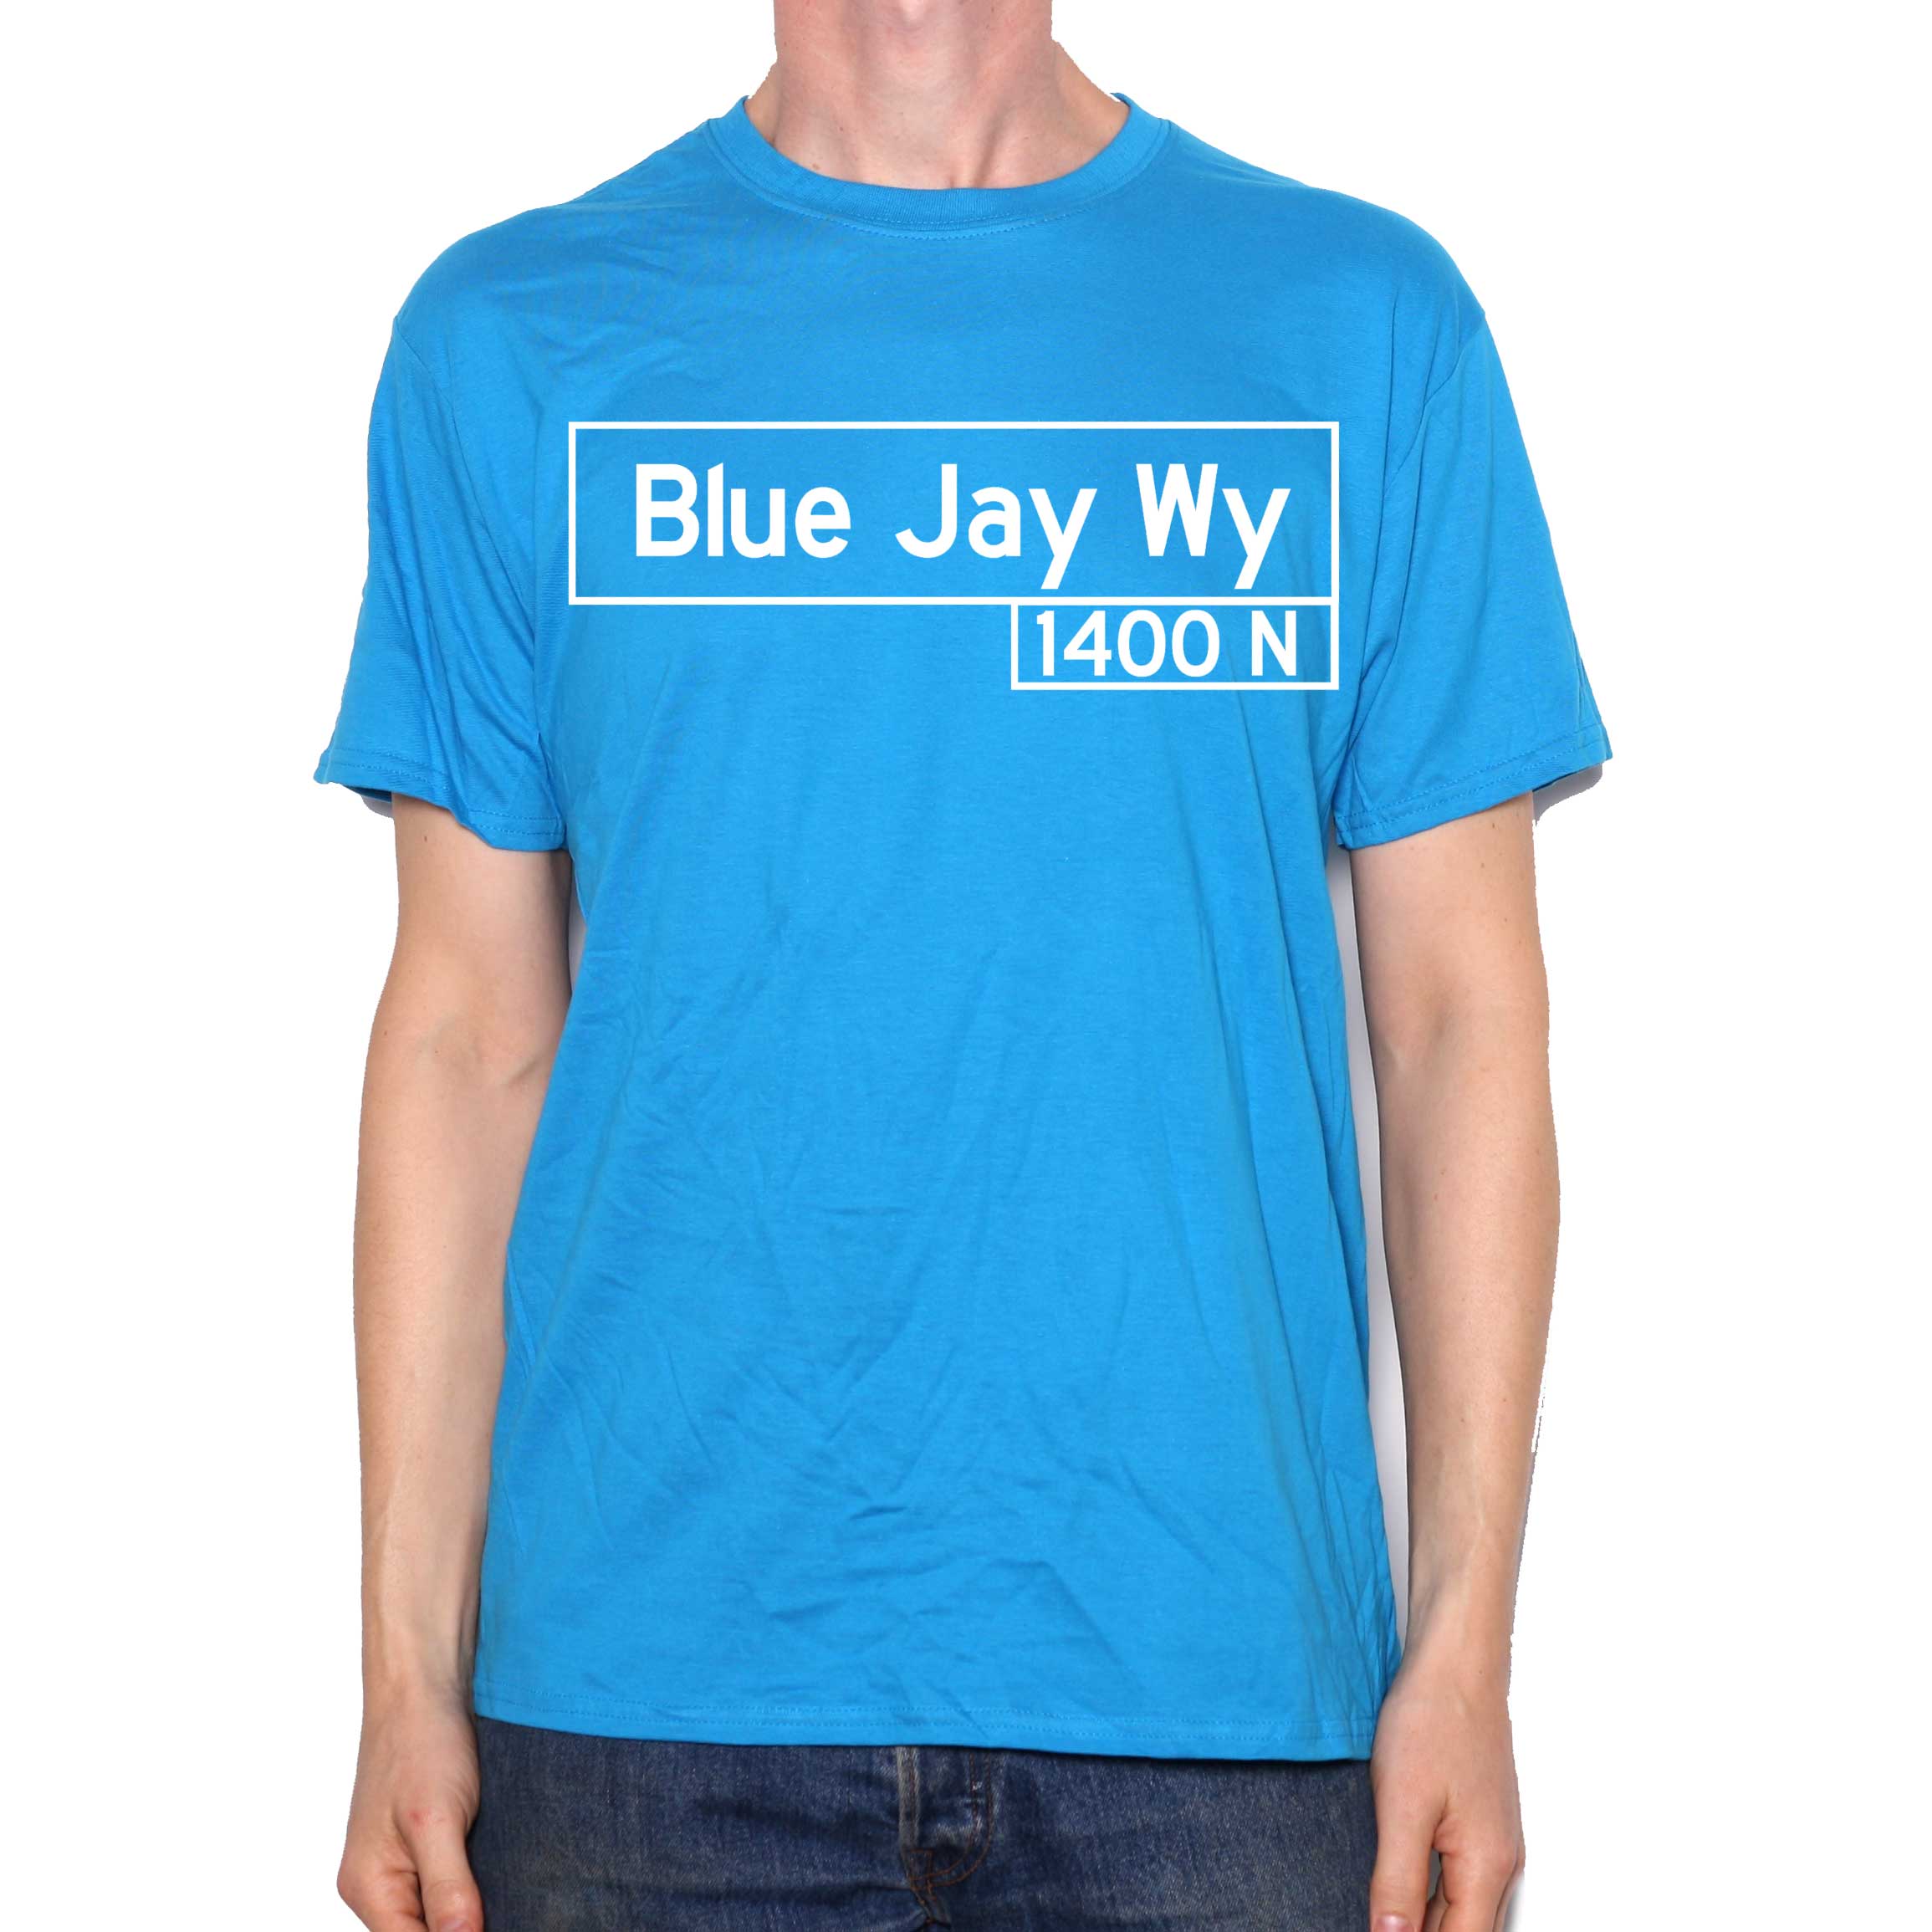 Blue Jay Way Sign T Shirt - Fab Four Inspired!